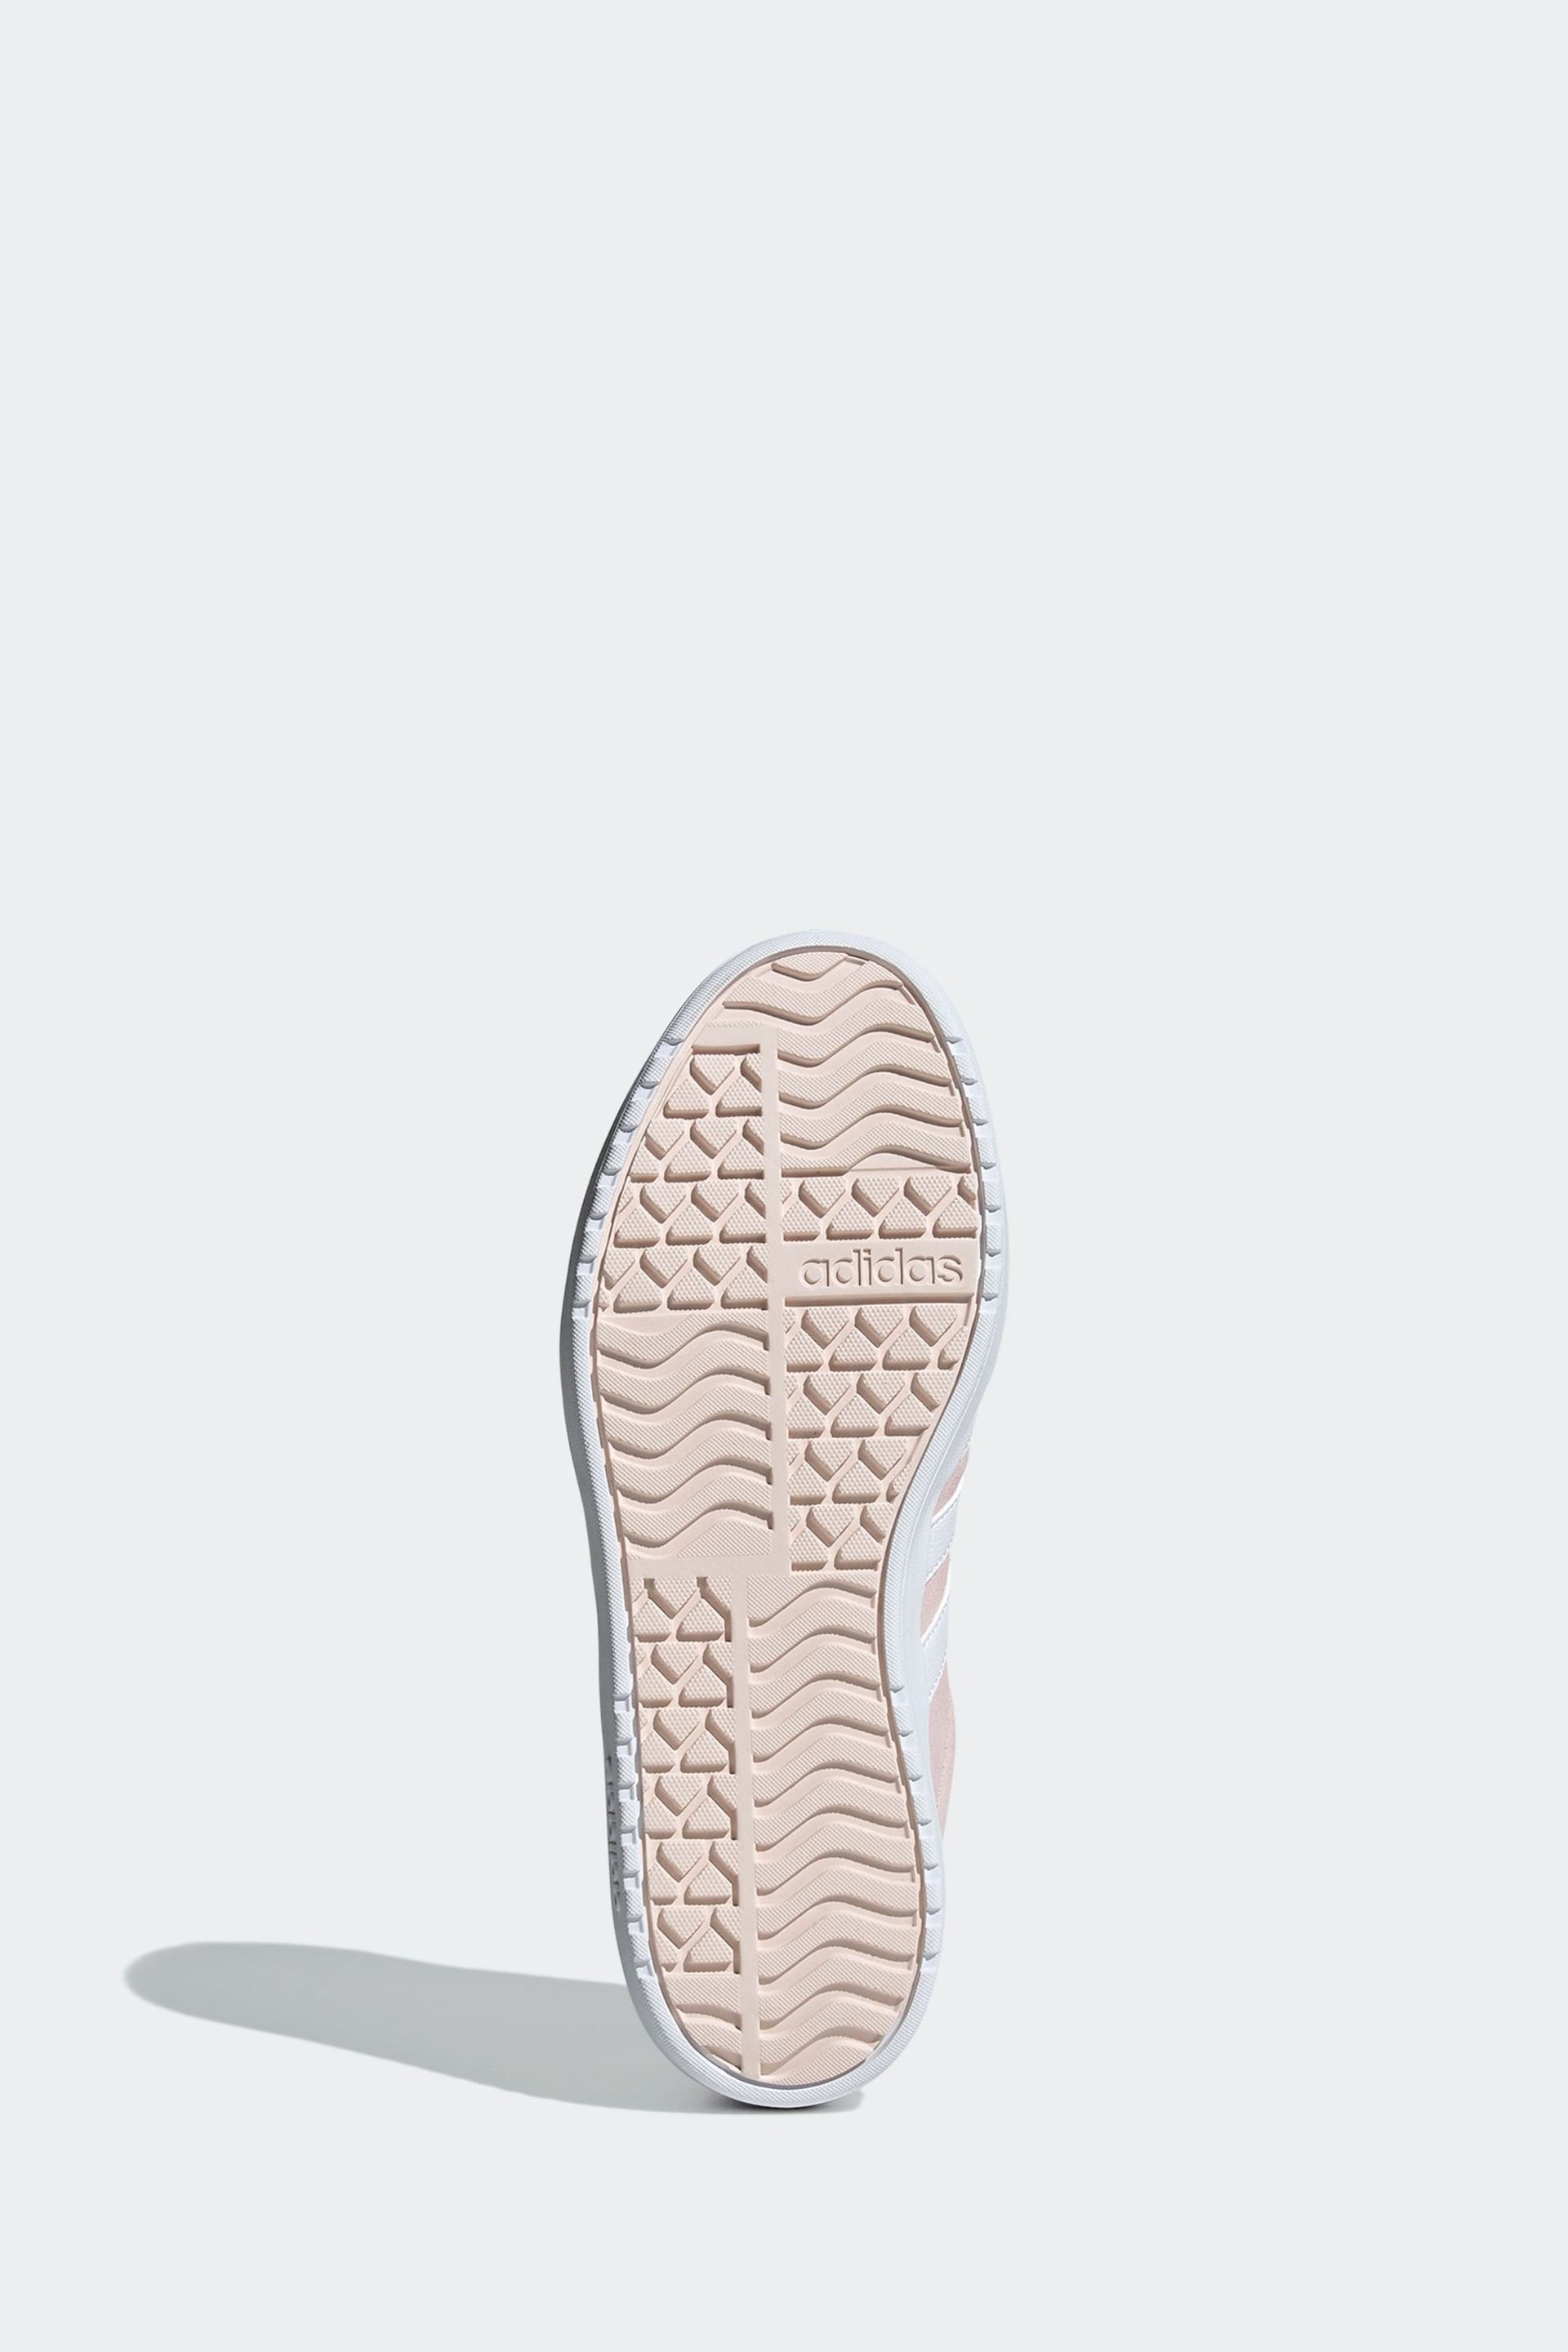 adidas Blush Pink Vl Court Bold Trainers - Image 9 of 11